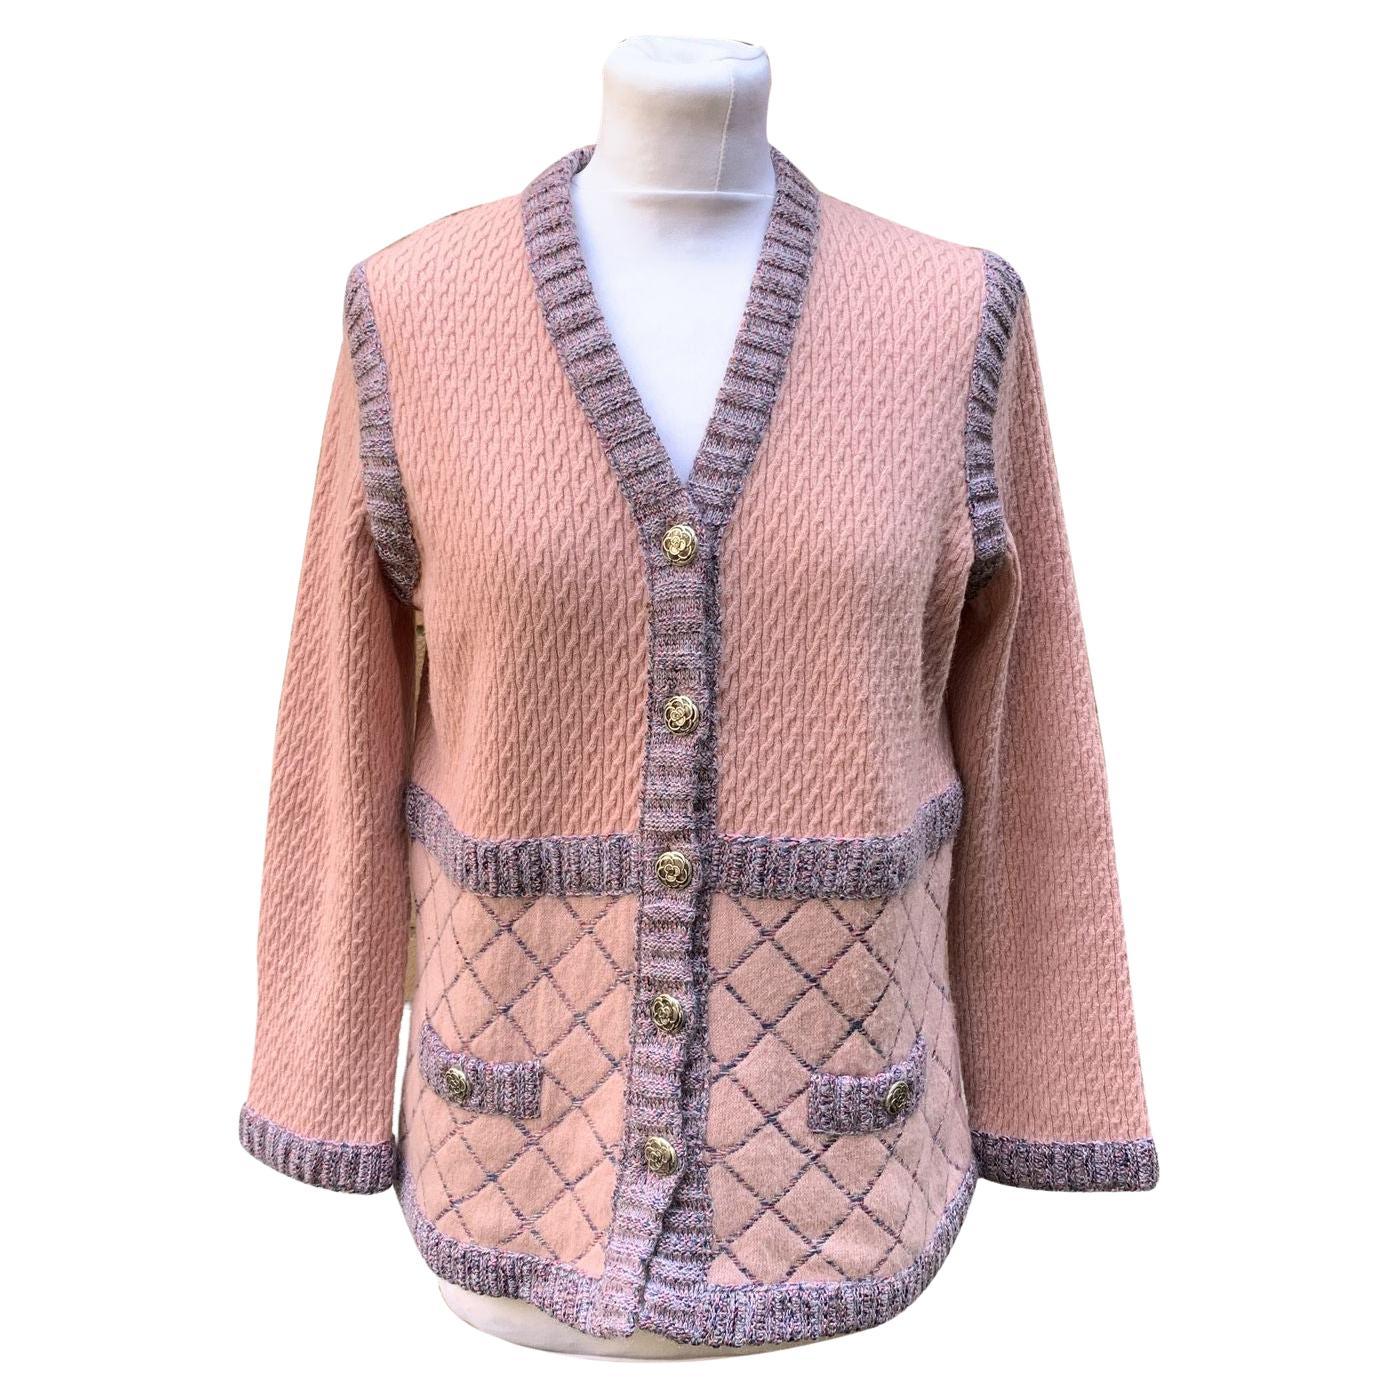 Chanel 2015 Pink Silk and Cashmere Knit Cardigan Size 40 FR For Sale